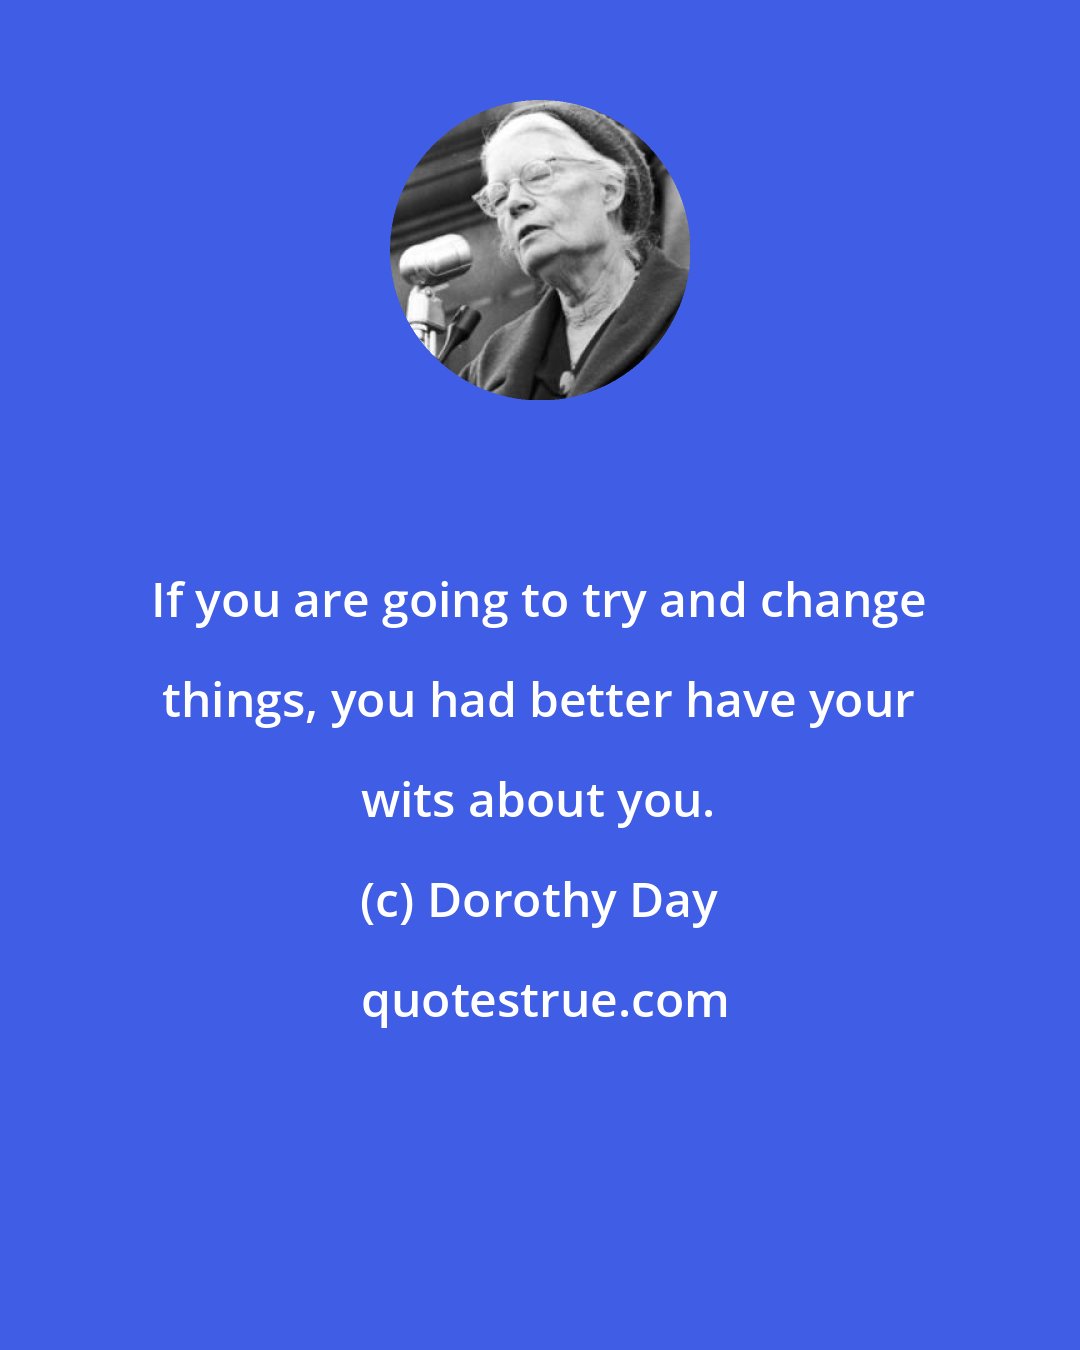 Dorothy Day: If you are going to try and change things, you had better have your wits about you.